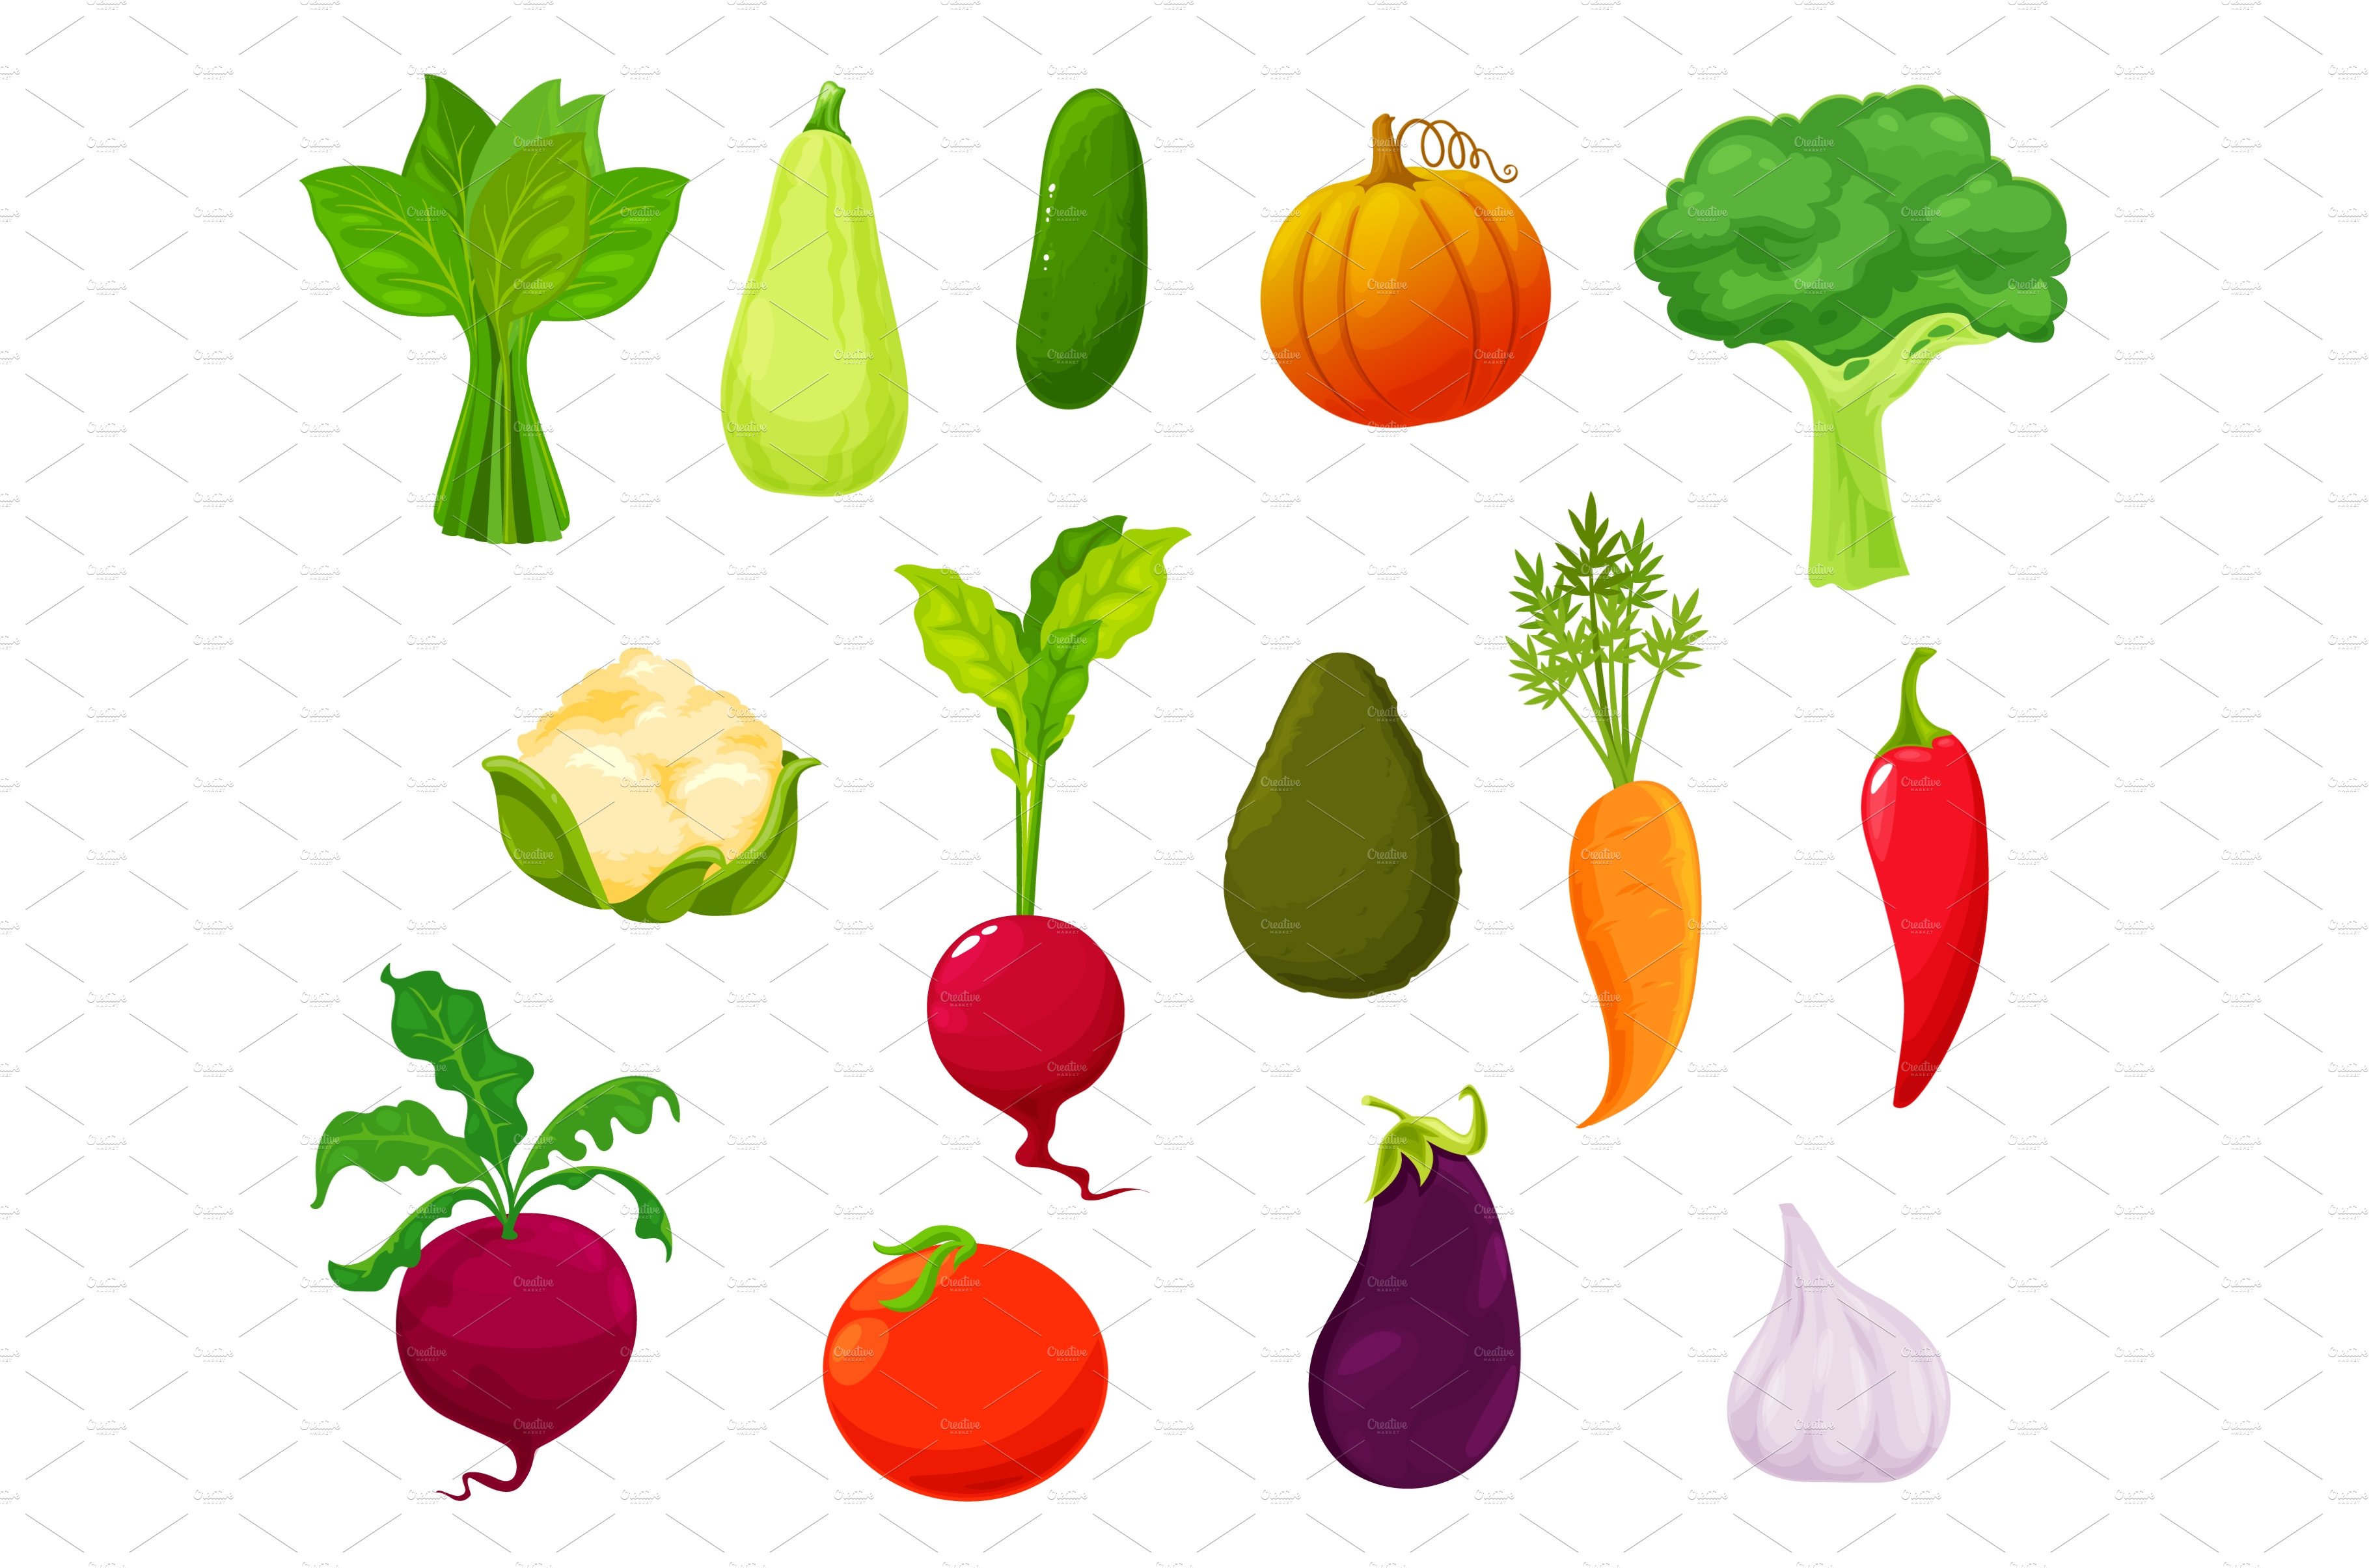 Farm vegetables food products cover image.